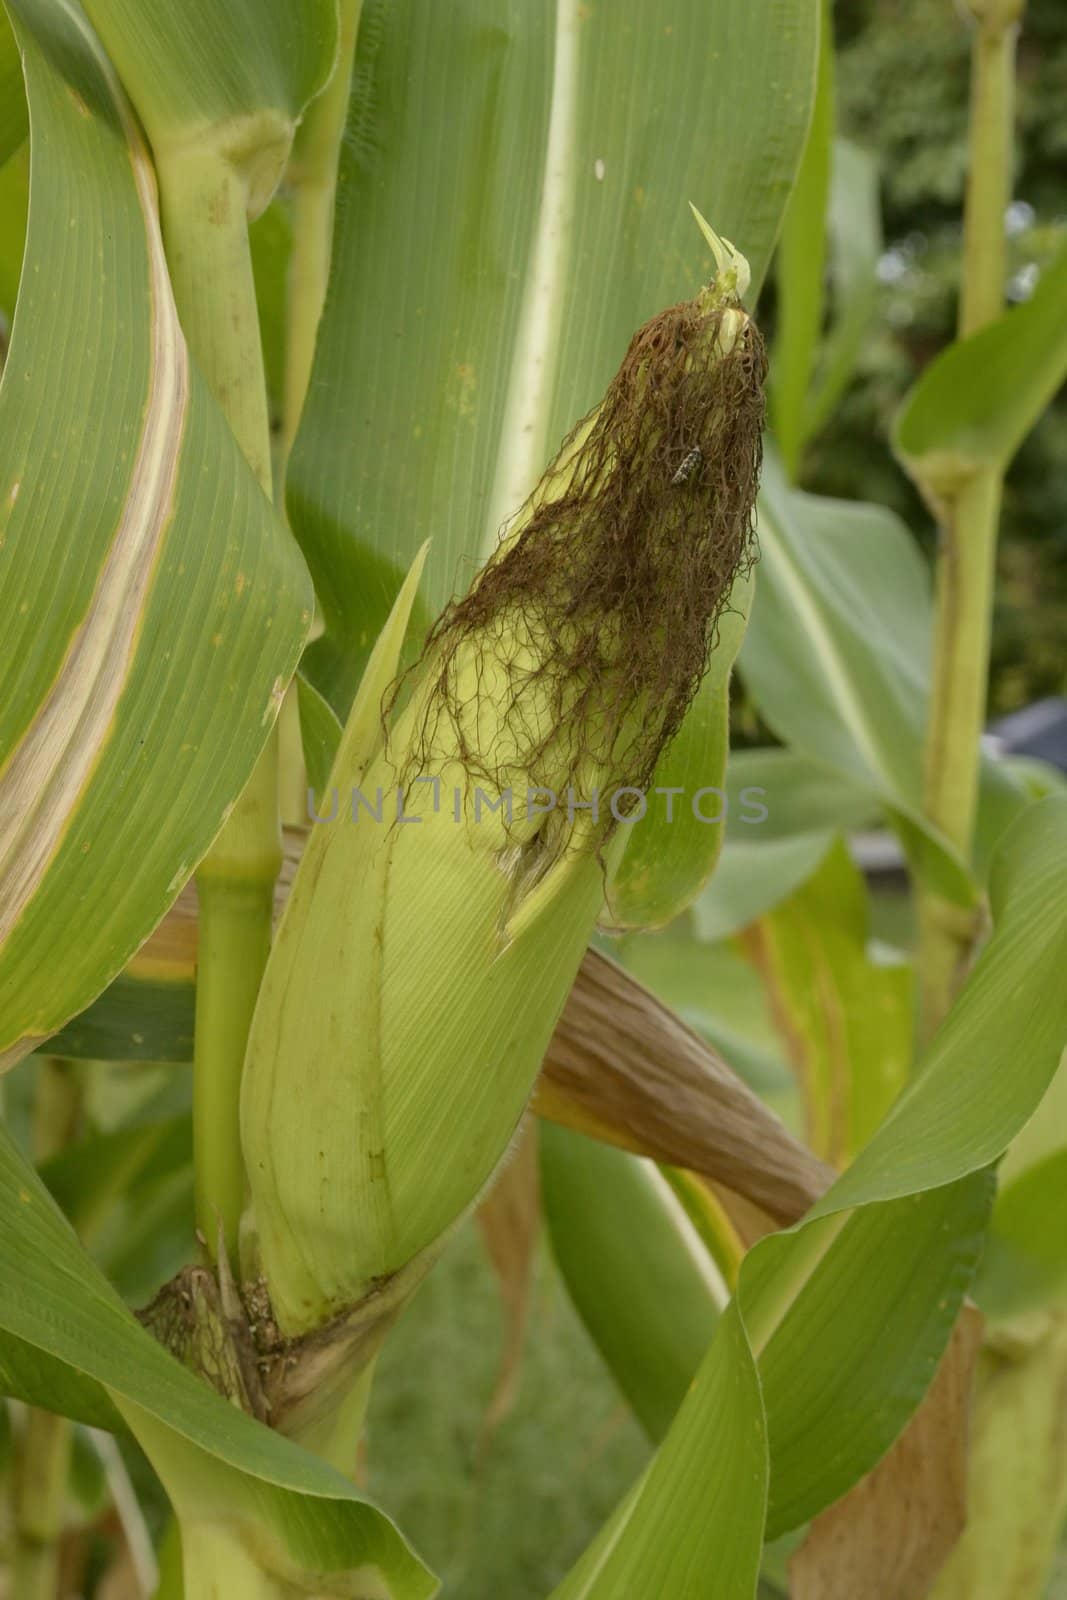 a pictue of green corn close up in thailand